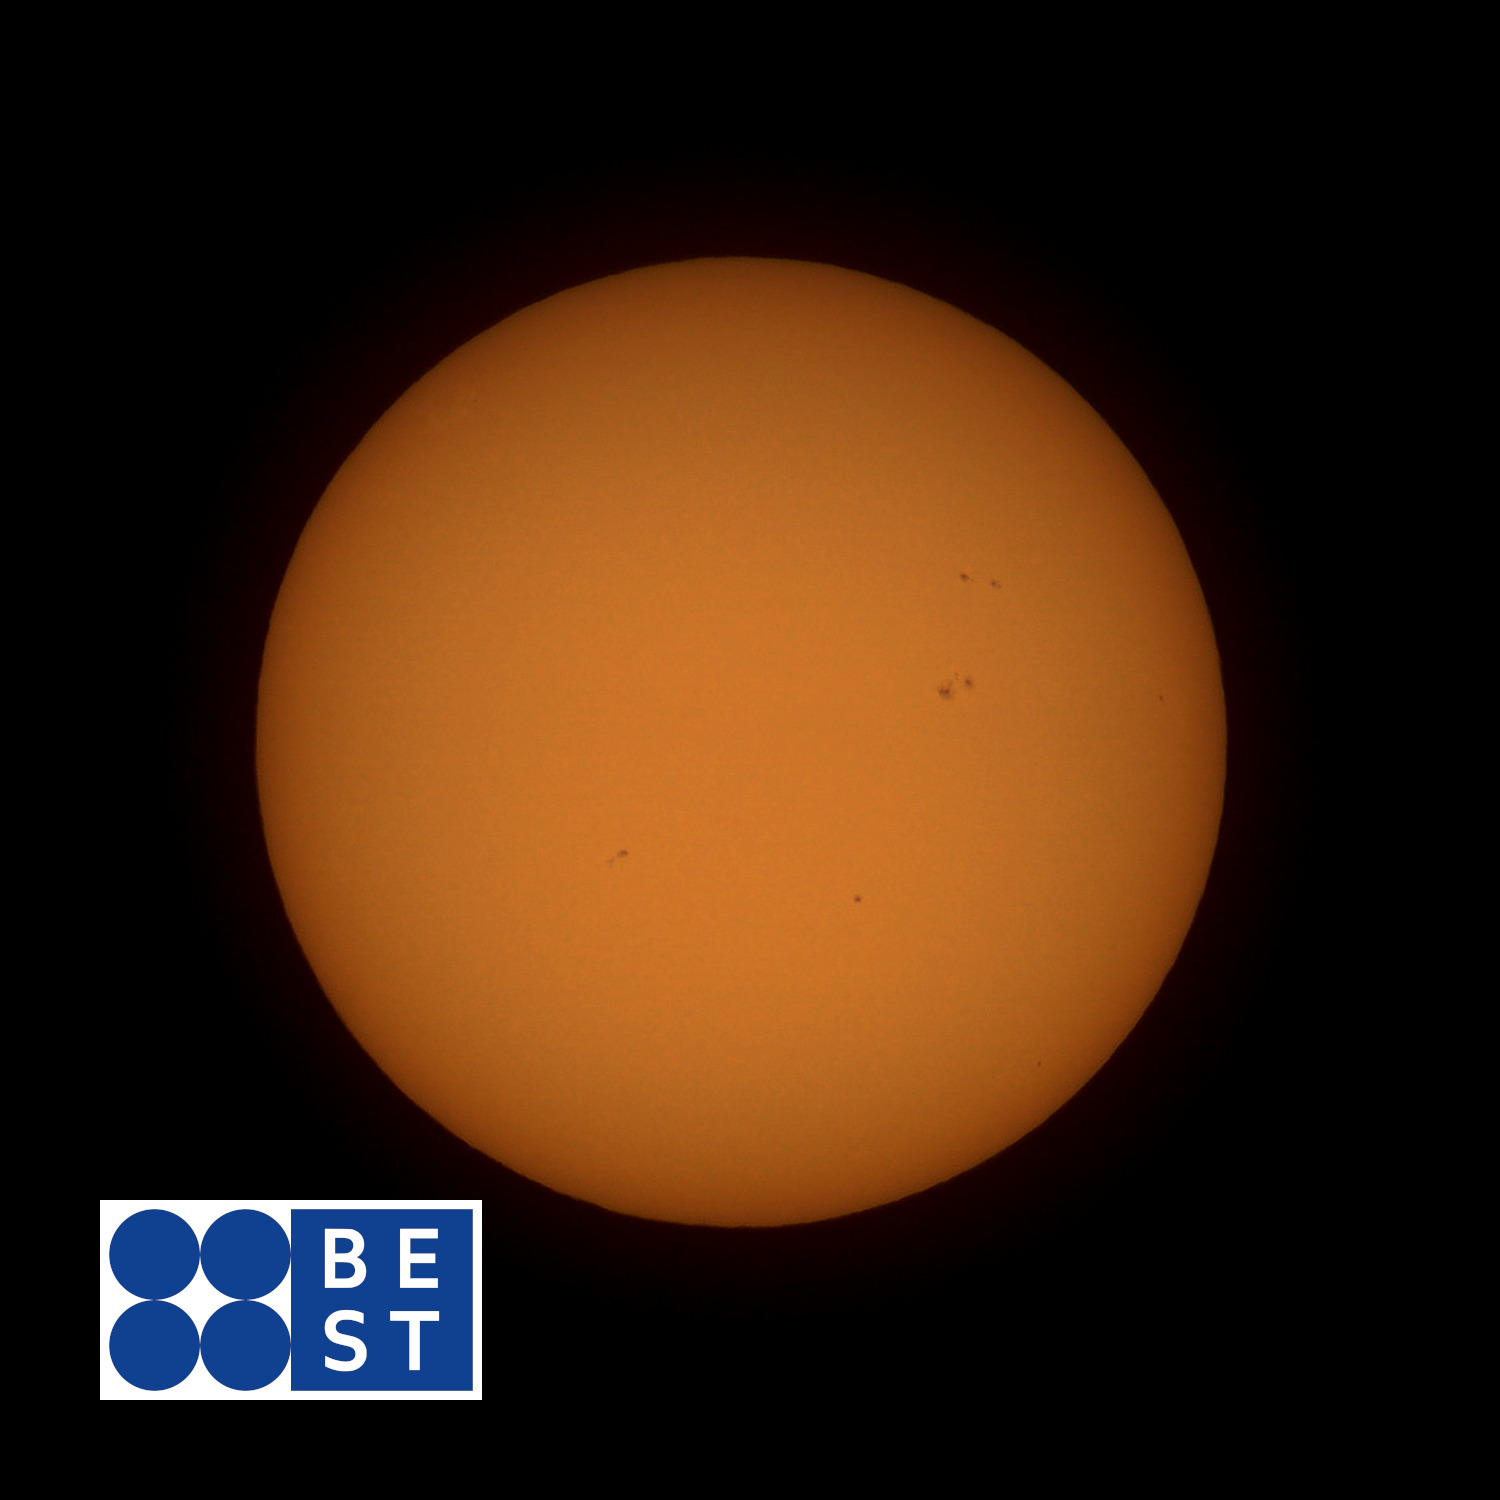 A picture of the sun taken by the Berry Empire Space & Telemetry team